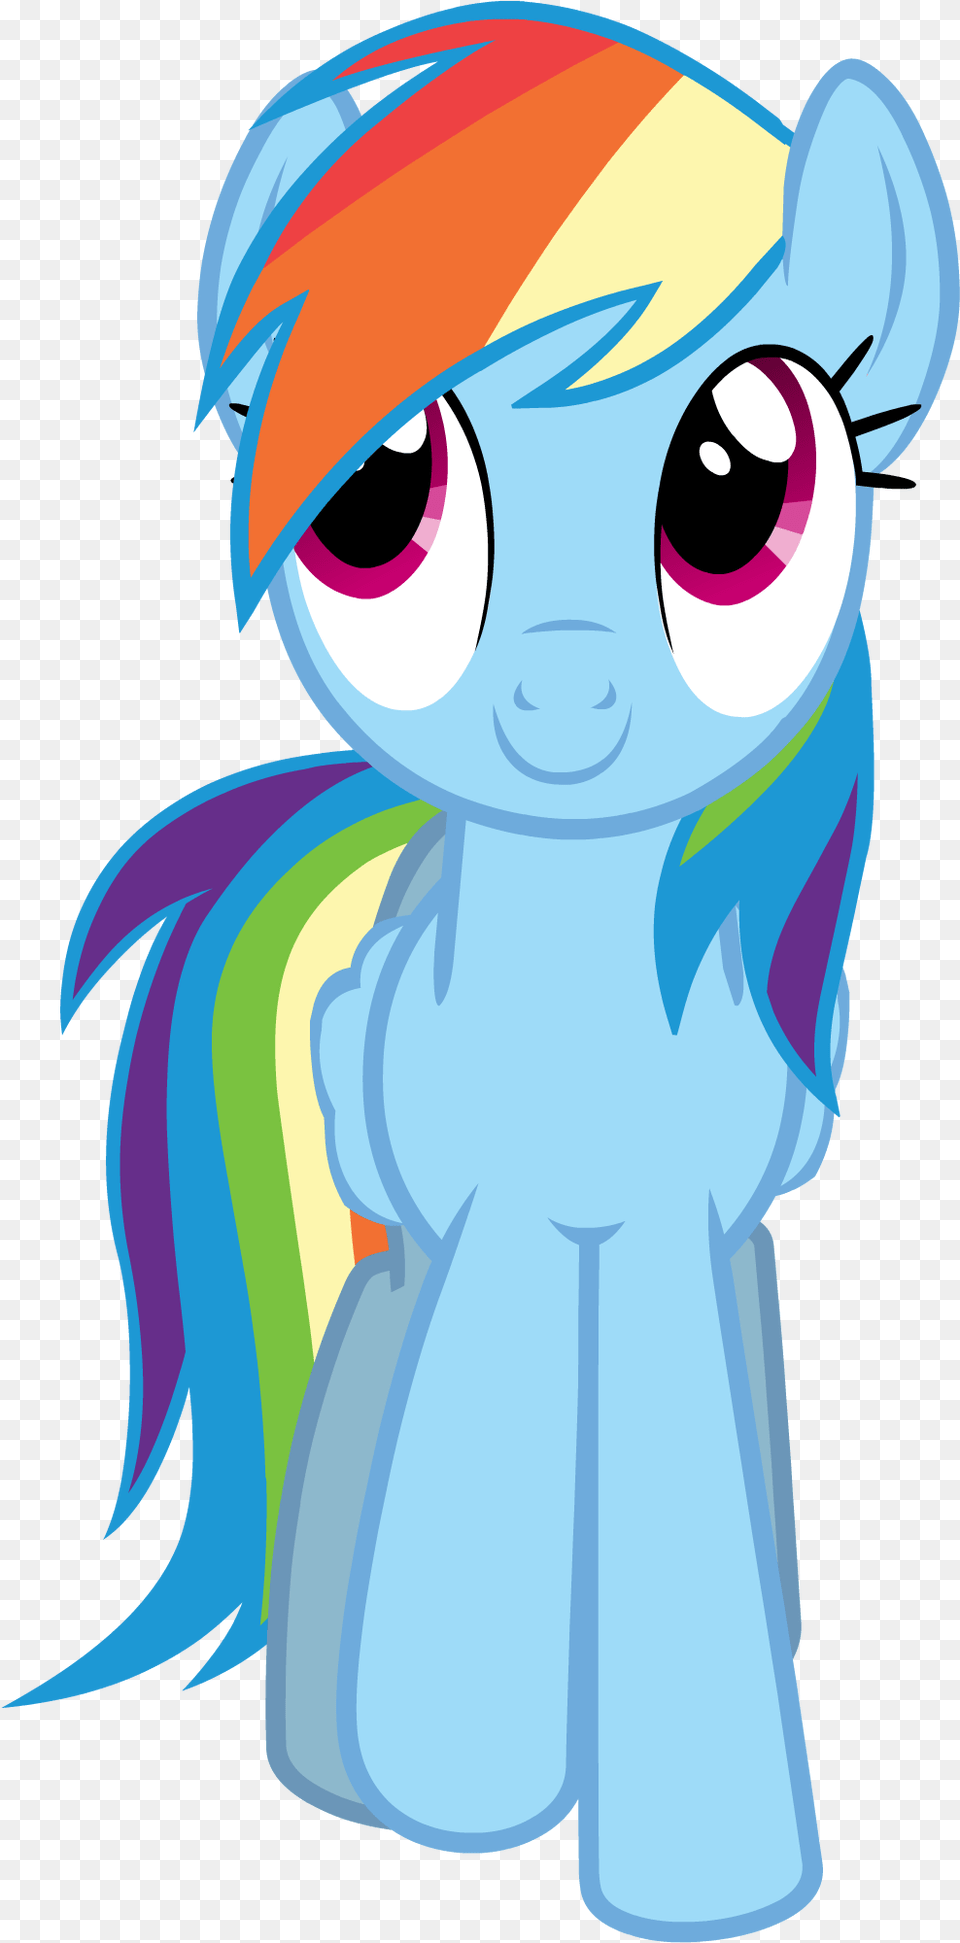 Download Pinkie Pie S E Mlp My Friendship Is Magic Rainbow Dash, Book, Comics, Publication, Baby Free Transparent Png